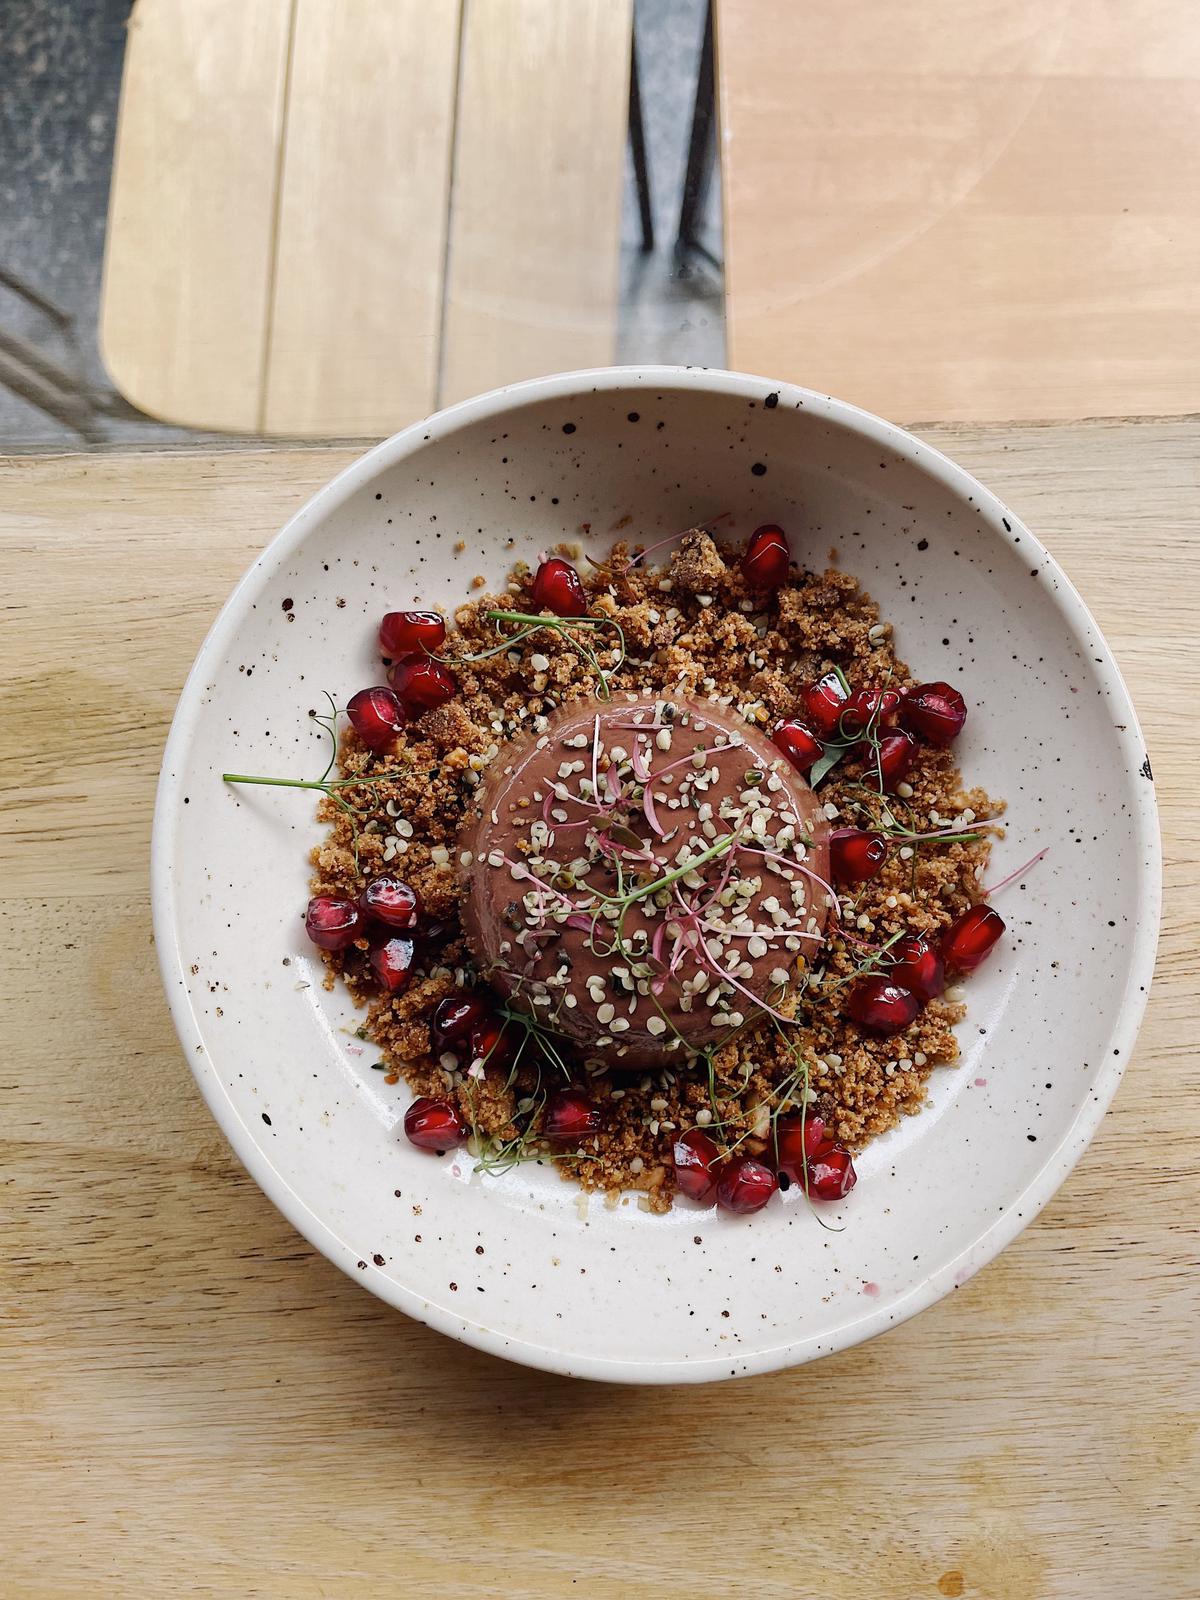 Chocolate mousse topped with hemp hearts at Copper + Cloves café in Bengaluru.